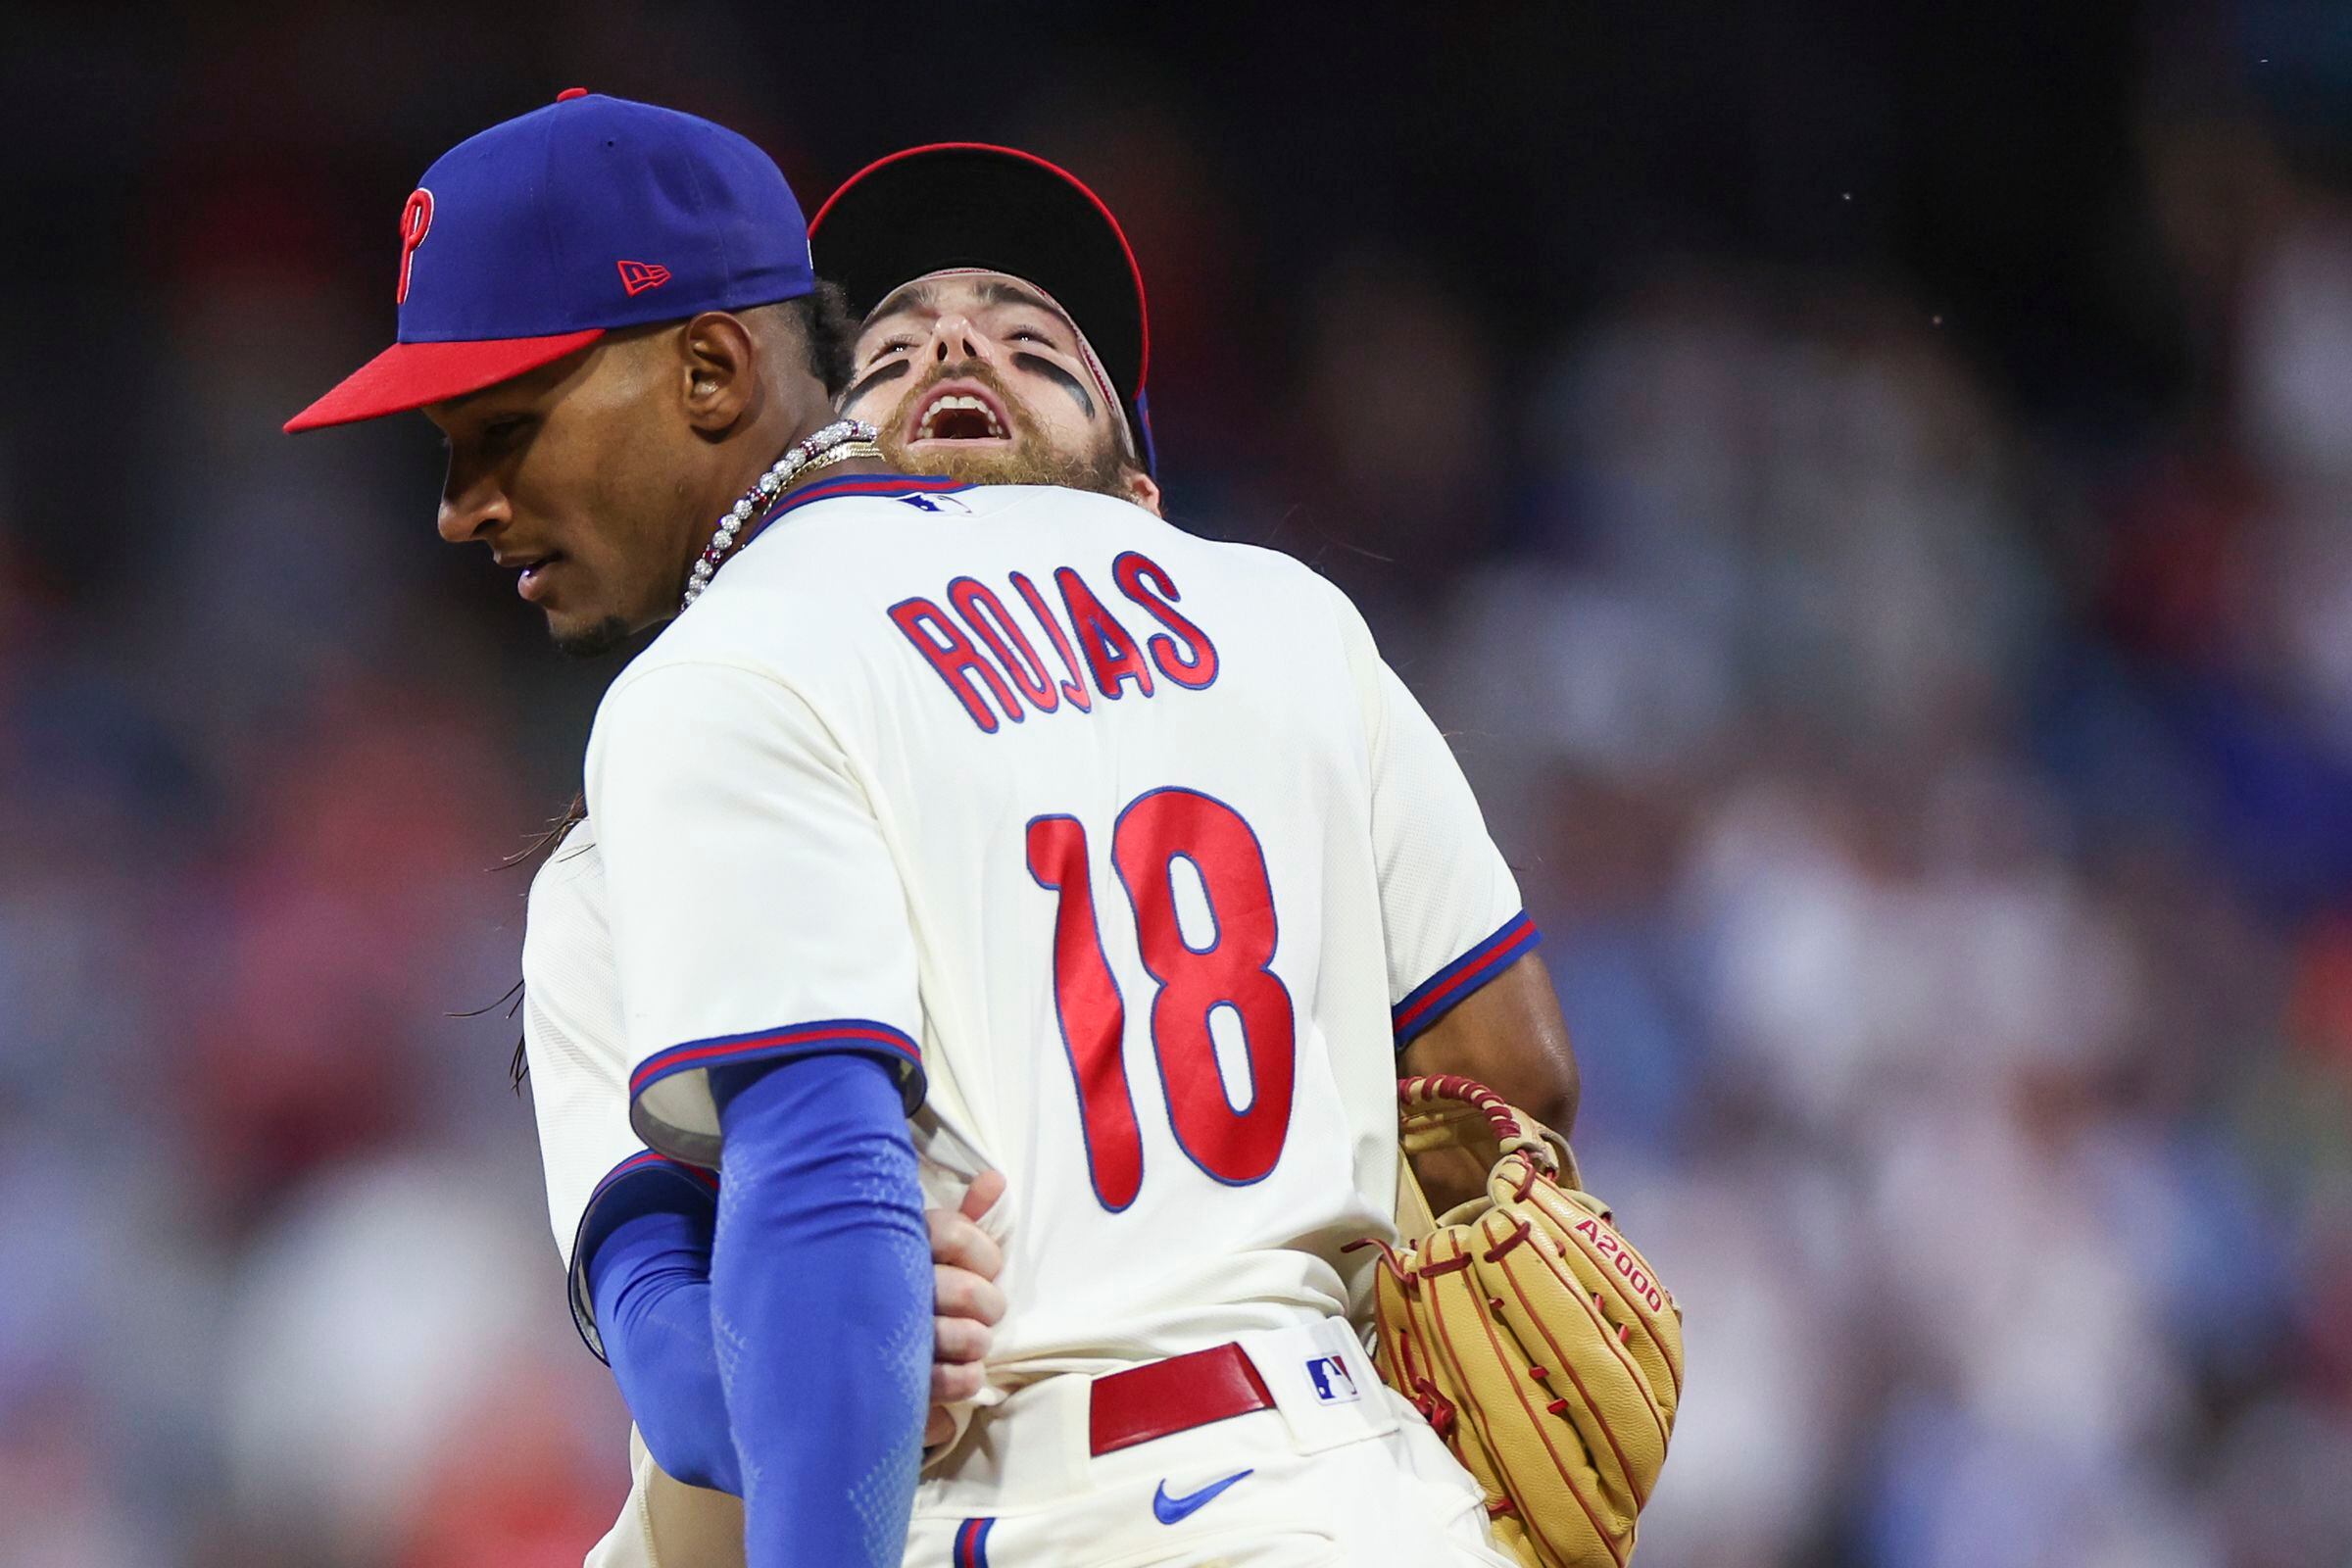 Photos from the Phillies' Memorial Day loss to the Giants